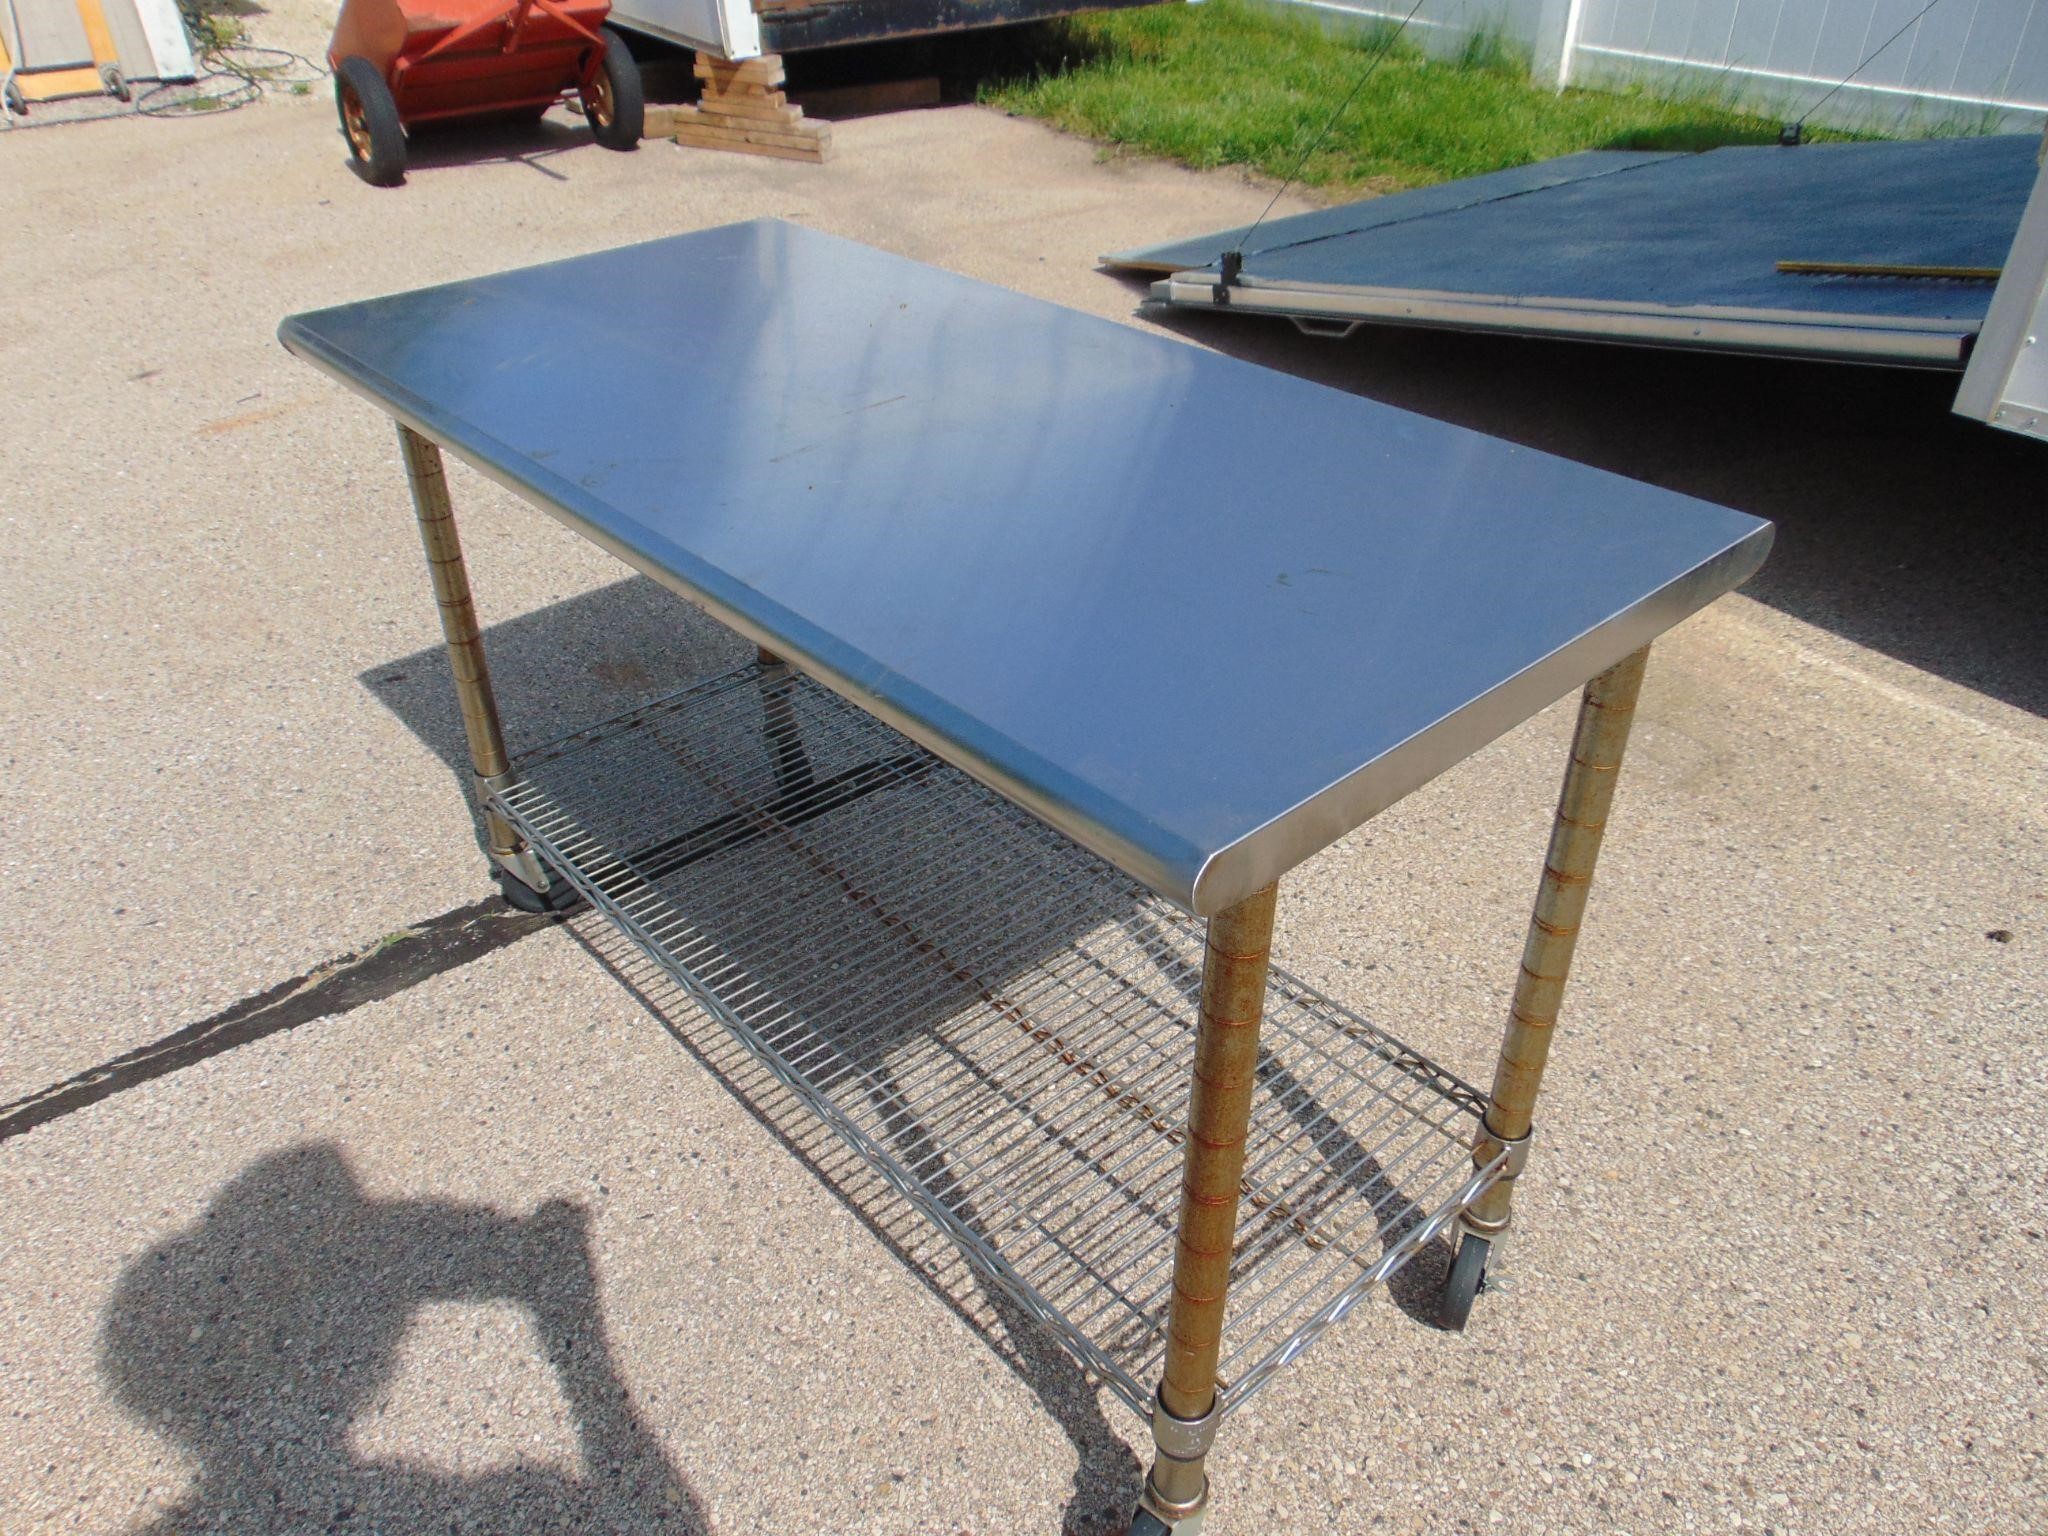 Rolling Stainless Steel Table